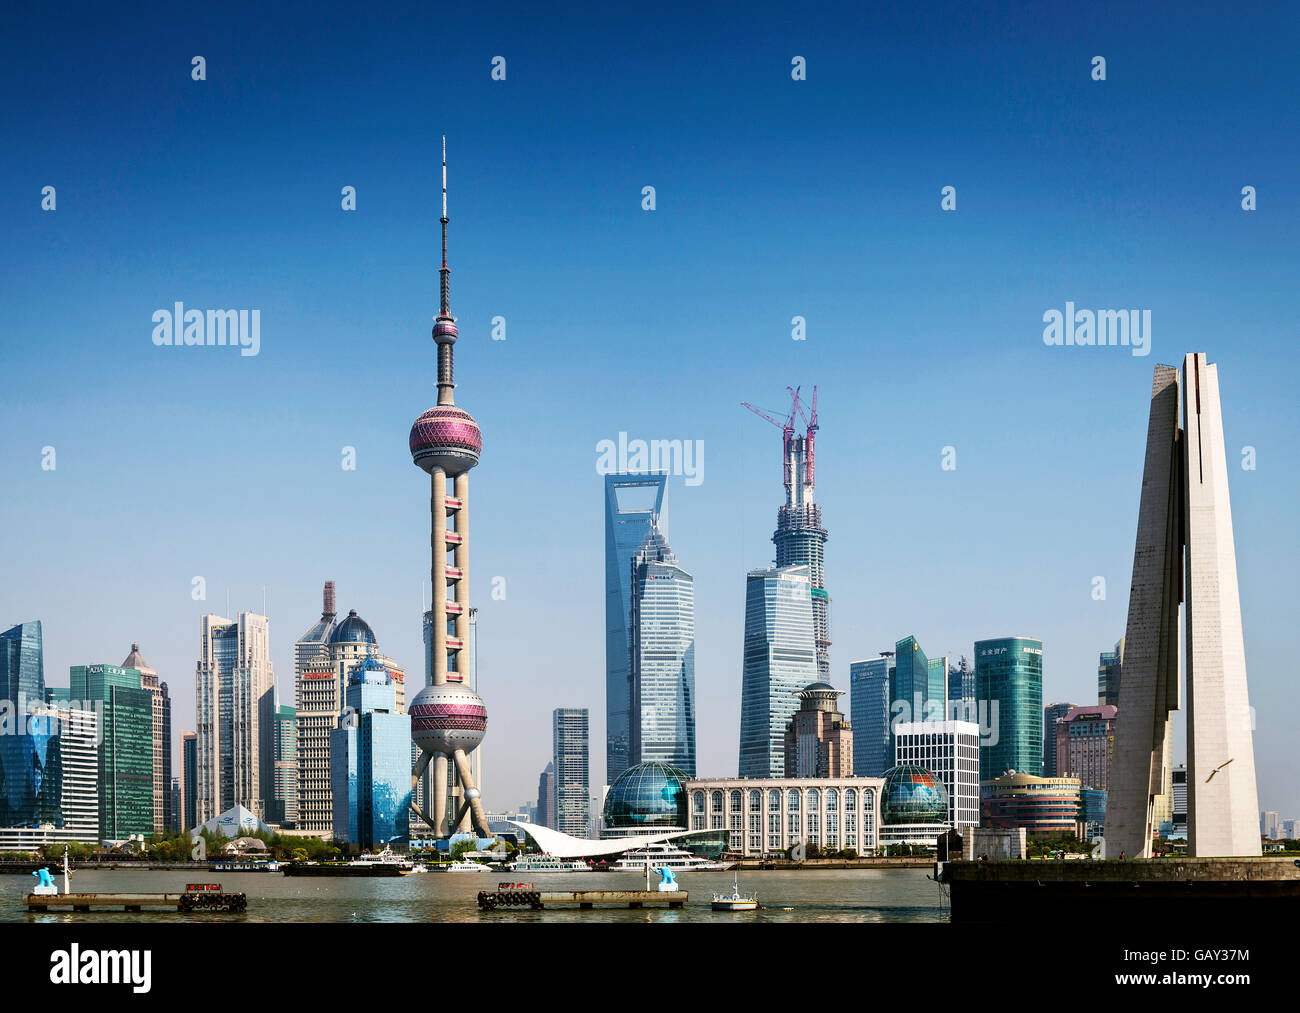 pudong riverside modern urban skyline skyscrapers in central shanghai city china by day Stock Photo